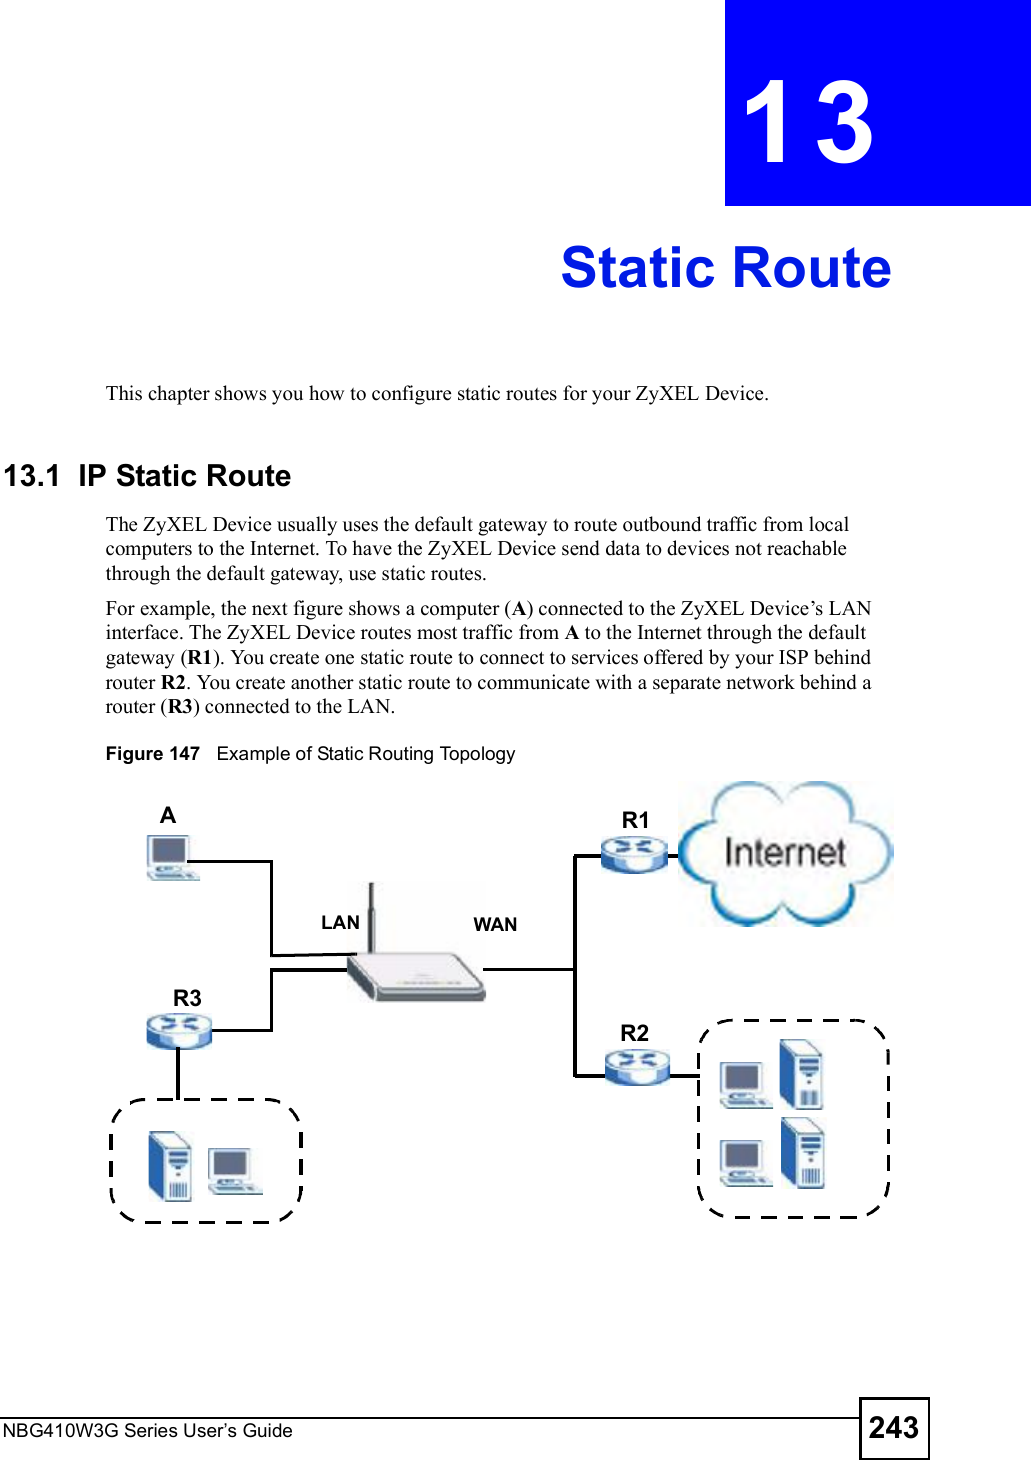 NBG410W3G Series User s Guide 243CHAPTER  13 Static RouteThis chapter shows you how to configure static routes for your ZyXEL Device.13.1  IP Static Route   The ZyXEL Device usually uses the default gateway to route outbound traffic from local computers to the Internet. To have the ZyXEL Device send data to devices not reachable through the default gateway, use static routes.For example, the next figure shows a computer (A) connected to the ZyXEL Device!s LAN interface. The ZyXEL Device routes most traffic from A to the Internet through the default gateway (R1). You create one static route to connect to services offered by your ISP behind router R2. You create another static route to communicate with a separate network behind a router (R3) connected to the LAN.   Figure 147   Example of Static Routing TopologyWANR1R2AR3LAN